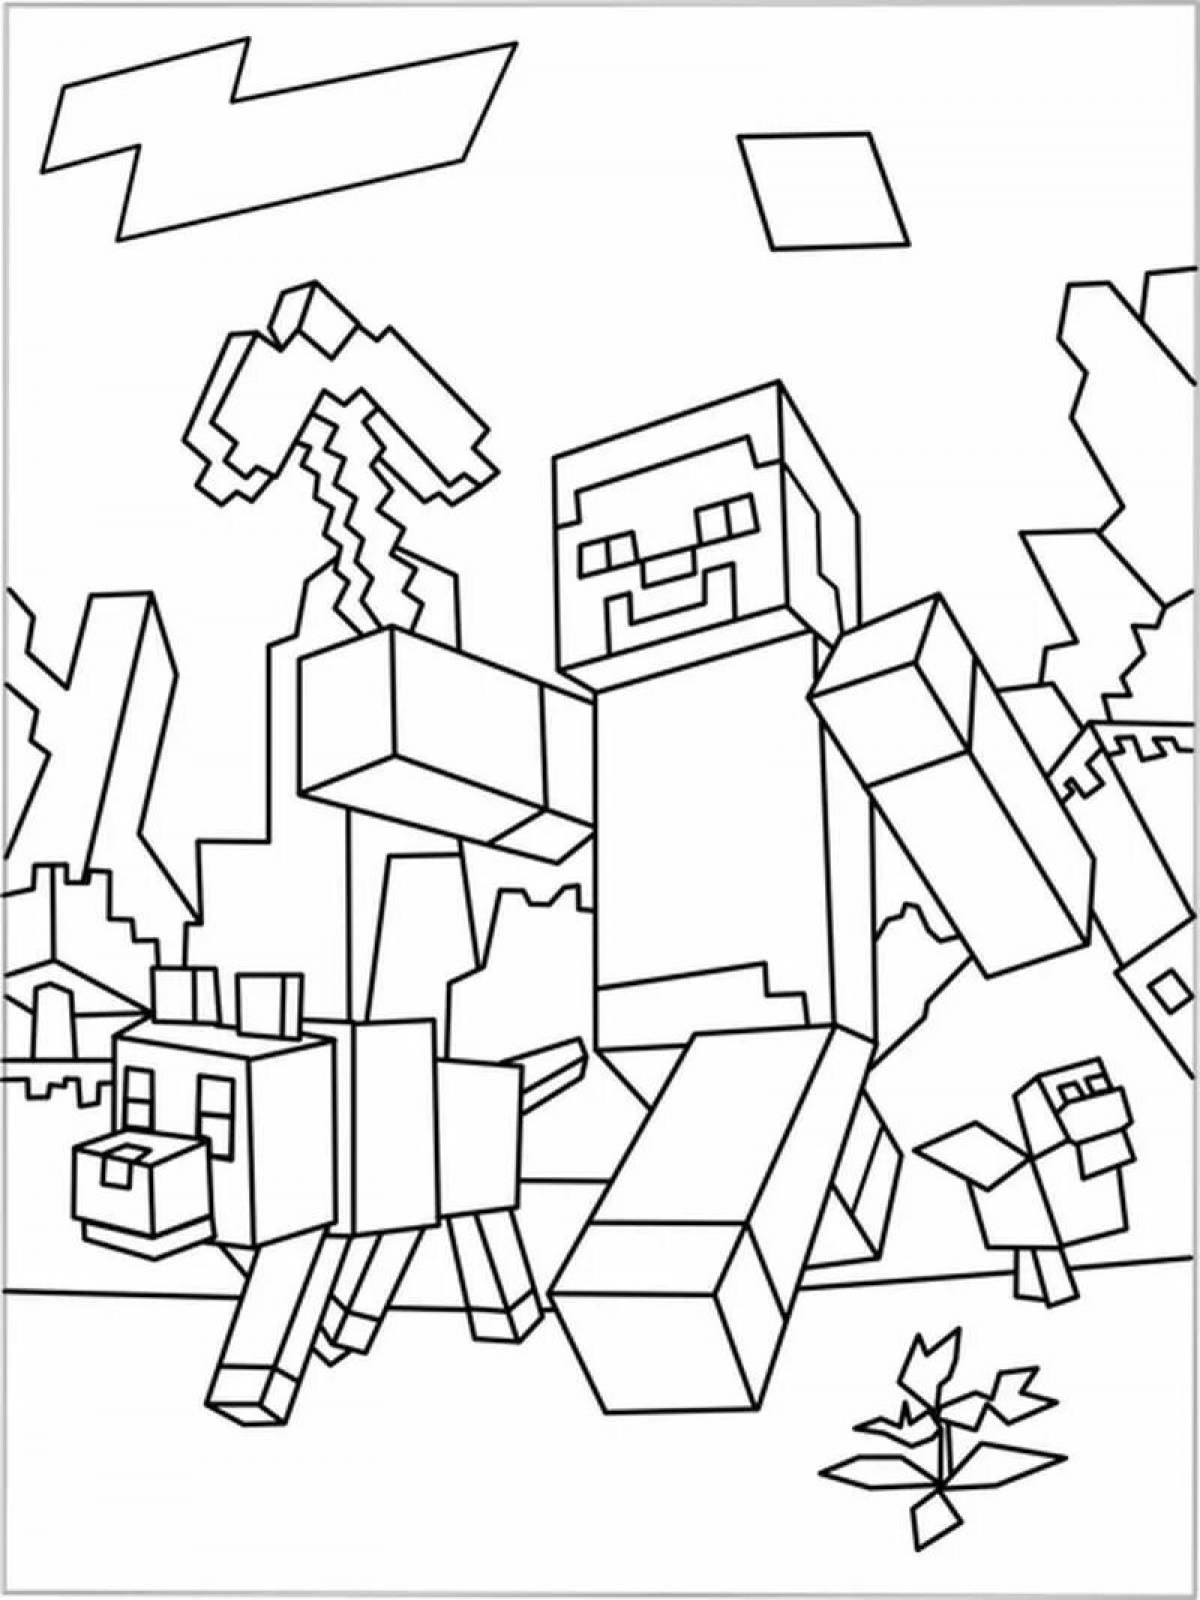 Colorful illusions minecraft coloring page